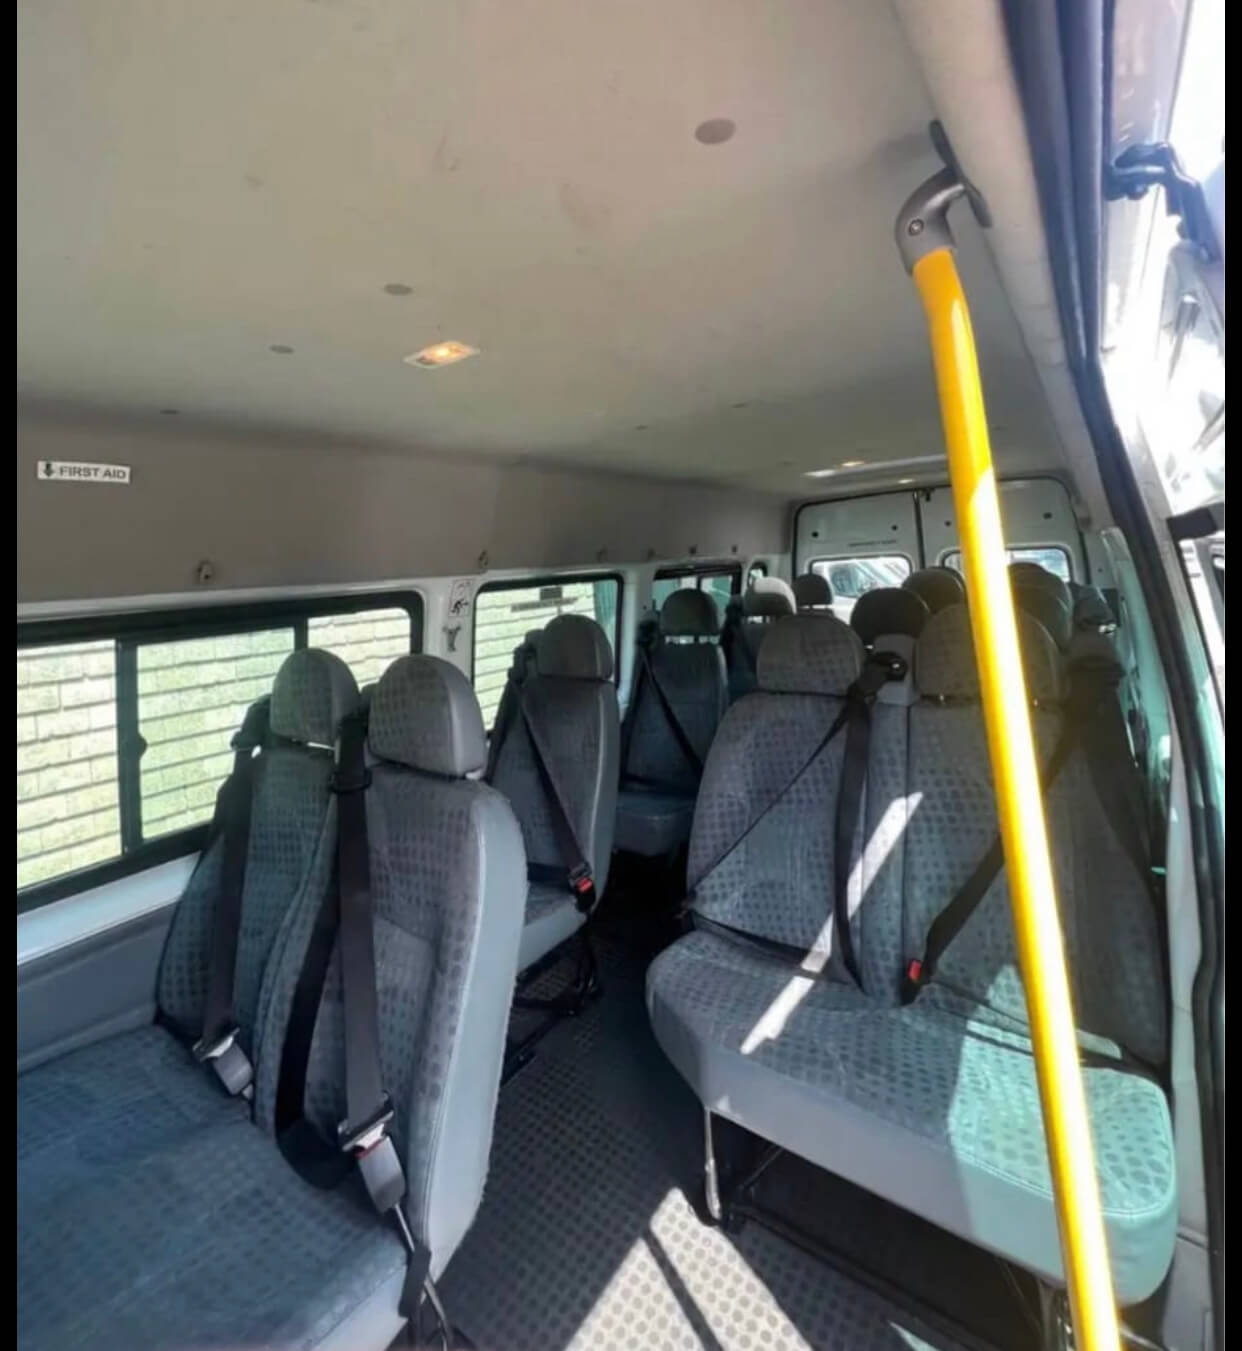 Rent a 16 seater Minibus  (Ford Transit 2013) from Excellence Coaches Ltd from Birmingham 